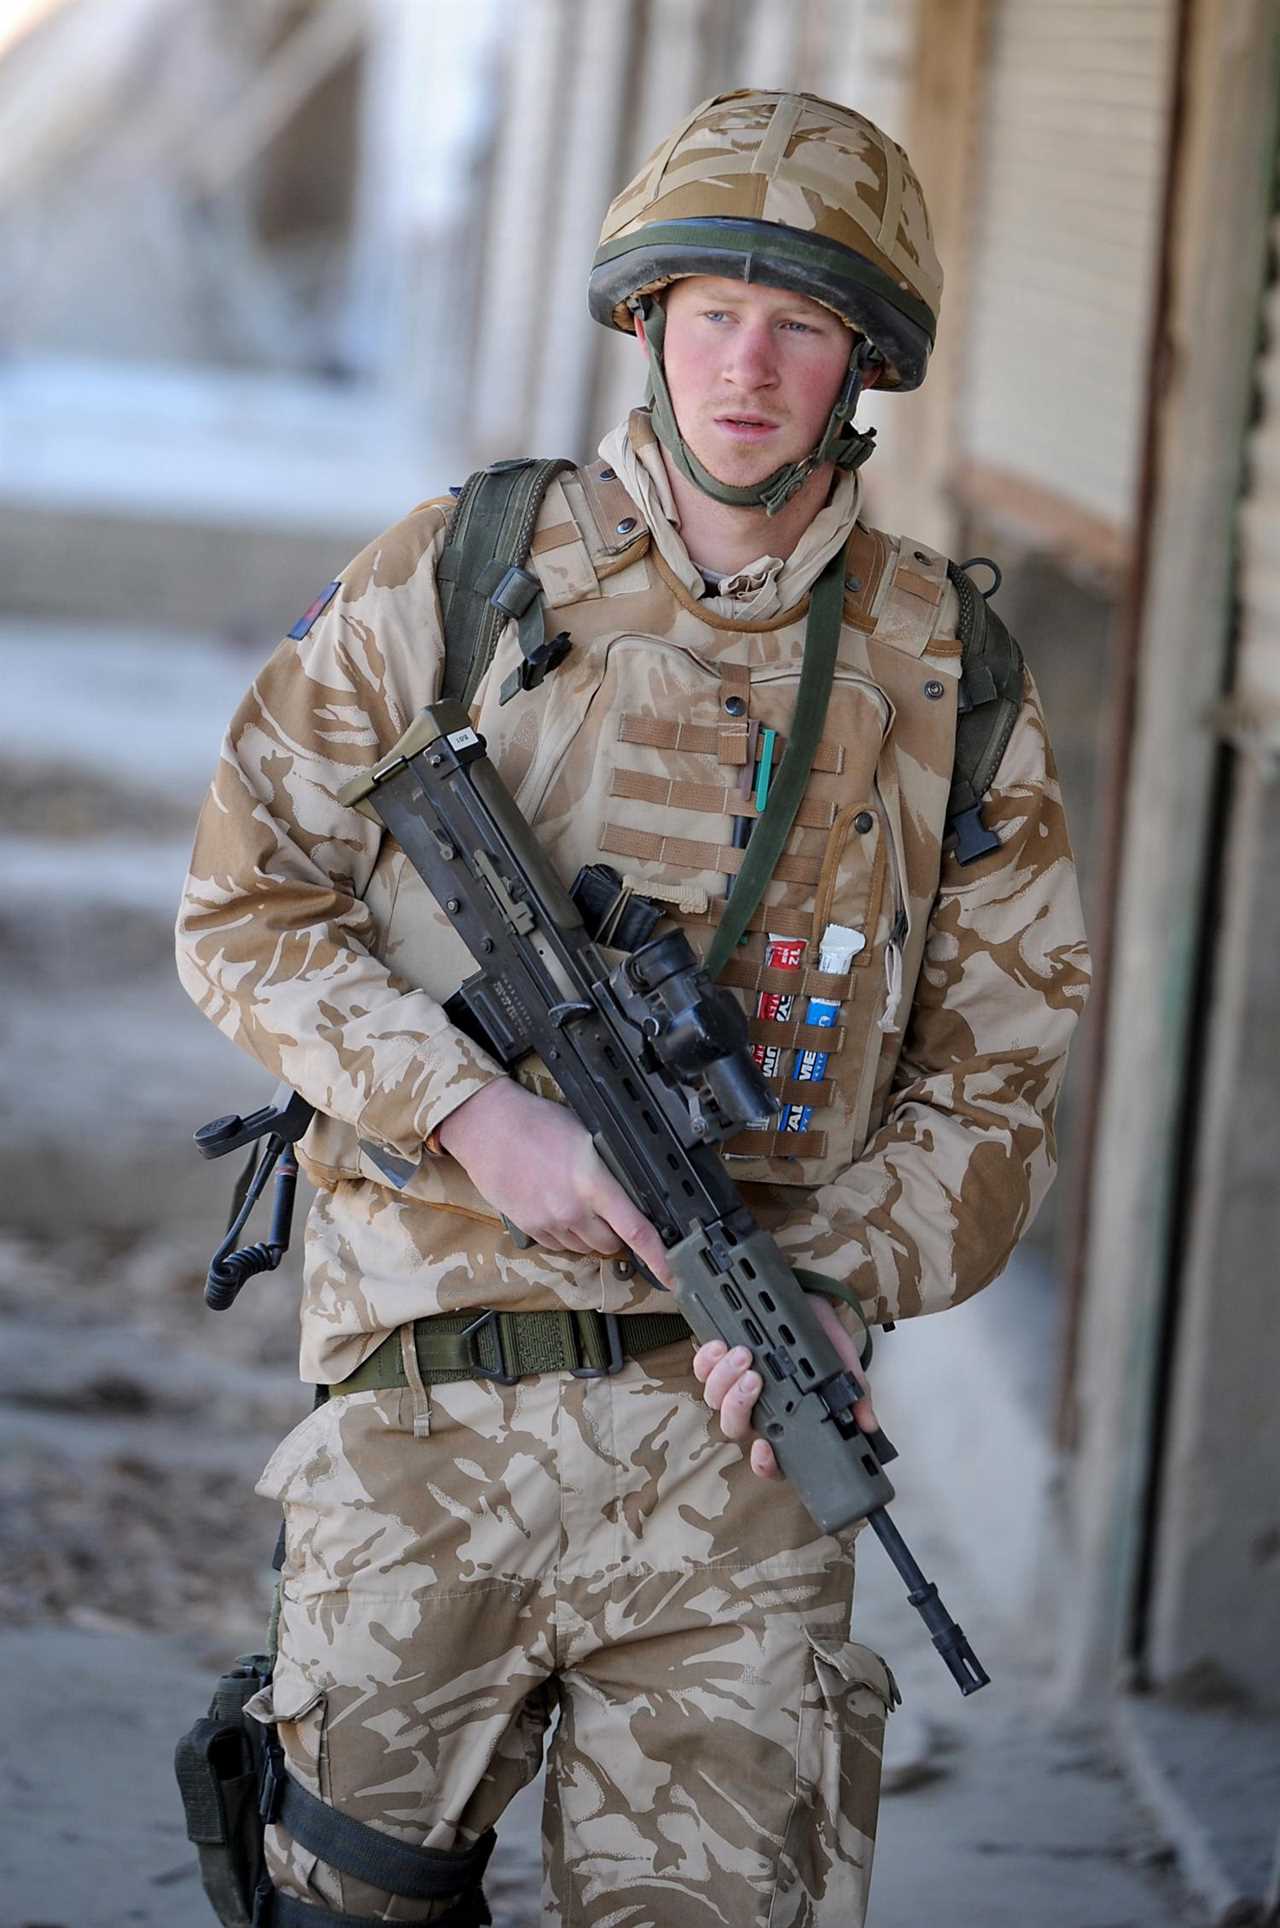 Prince Harry’s boast of 25 Taliban kills in new memoir Spare was calculated for a self-serving reason, experts claim